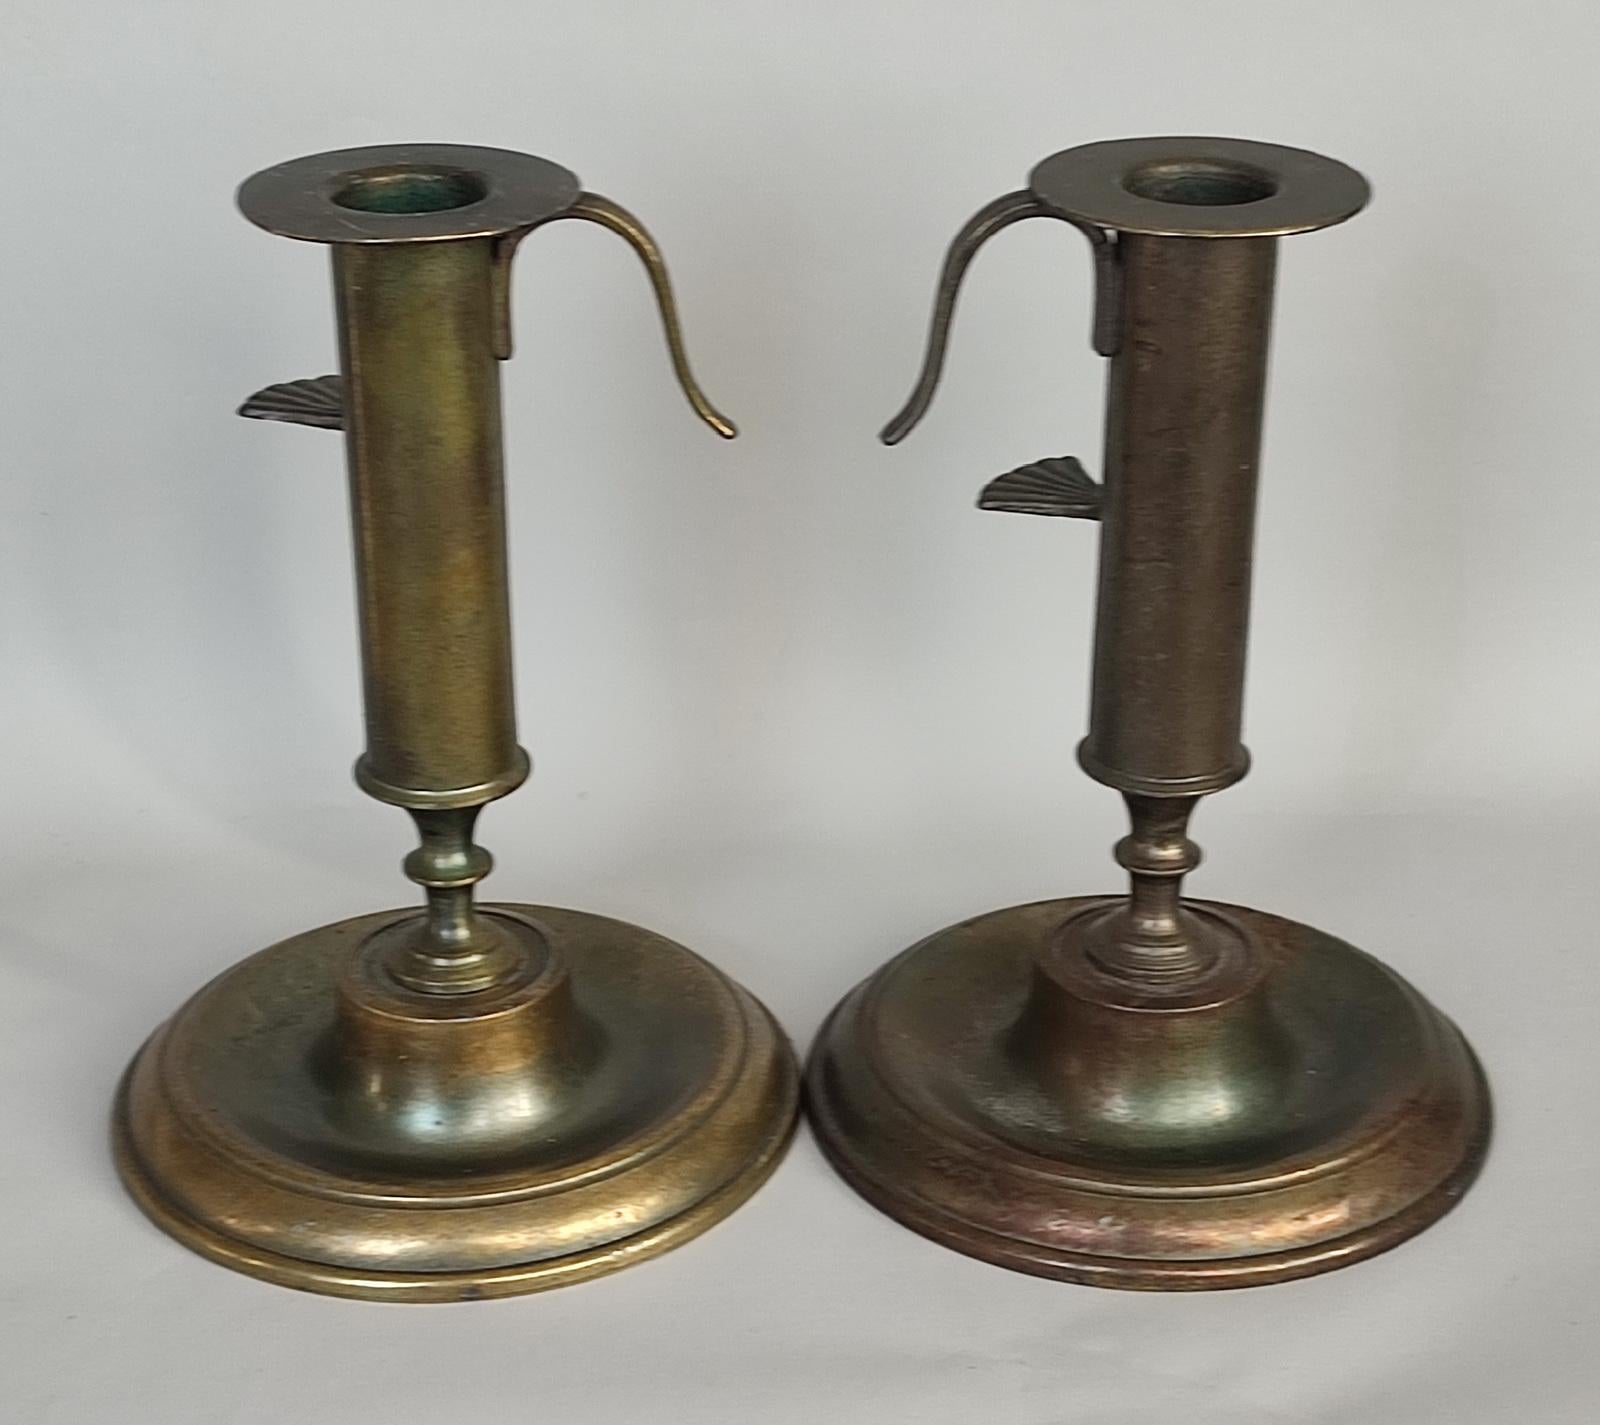 Antique Brass Adjustable Push Up Pair of Candleholders, 19th Century For Sale 4